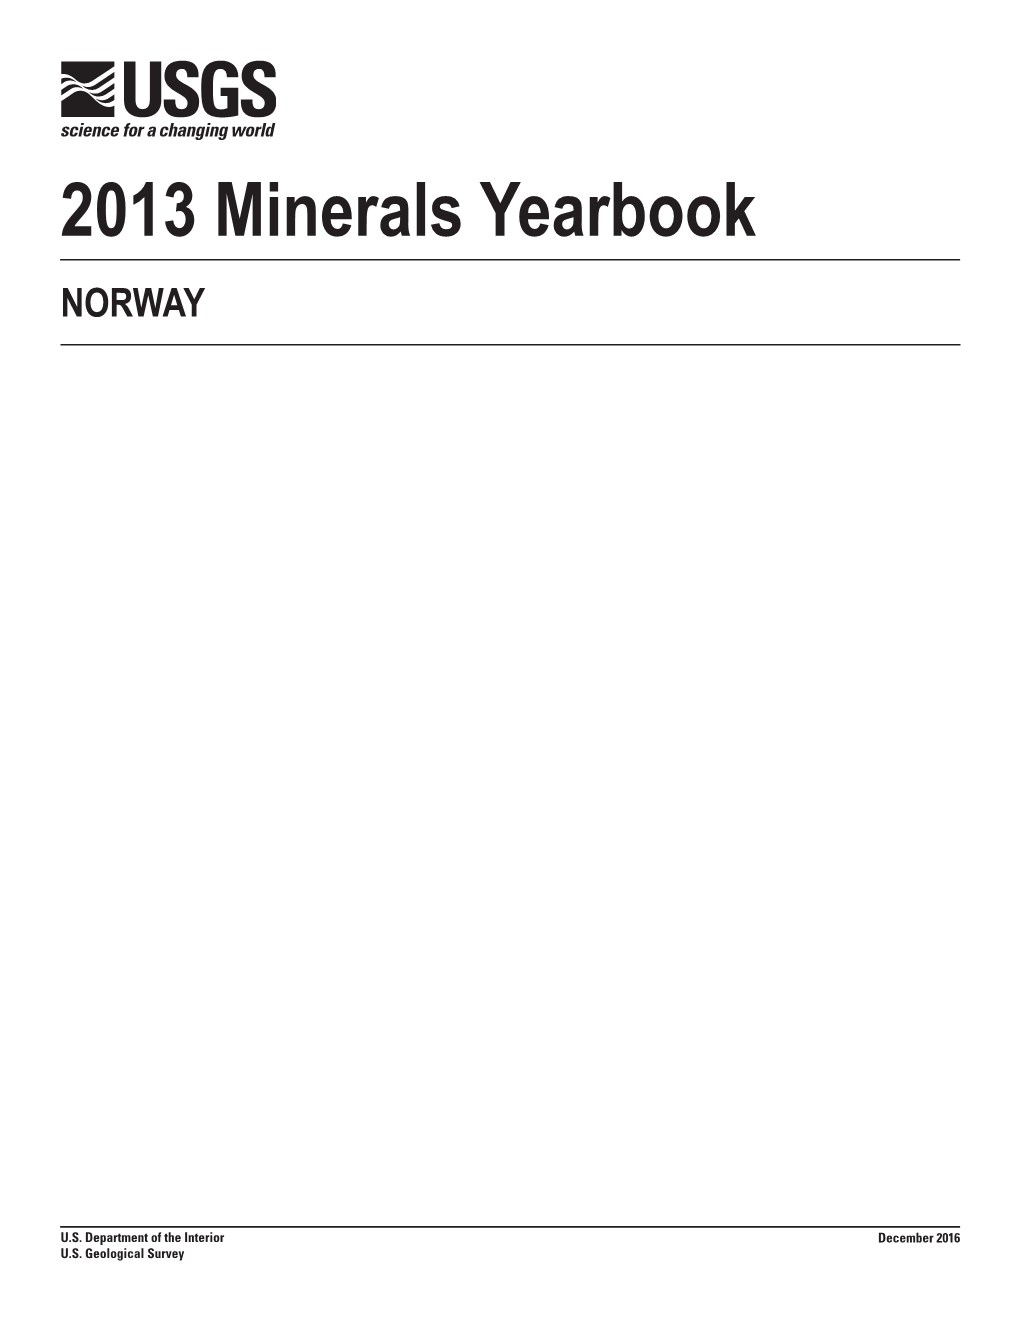 The Mineral Industry of Norway in 2013